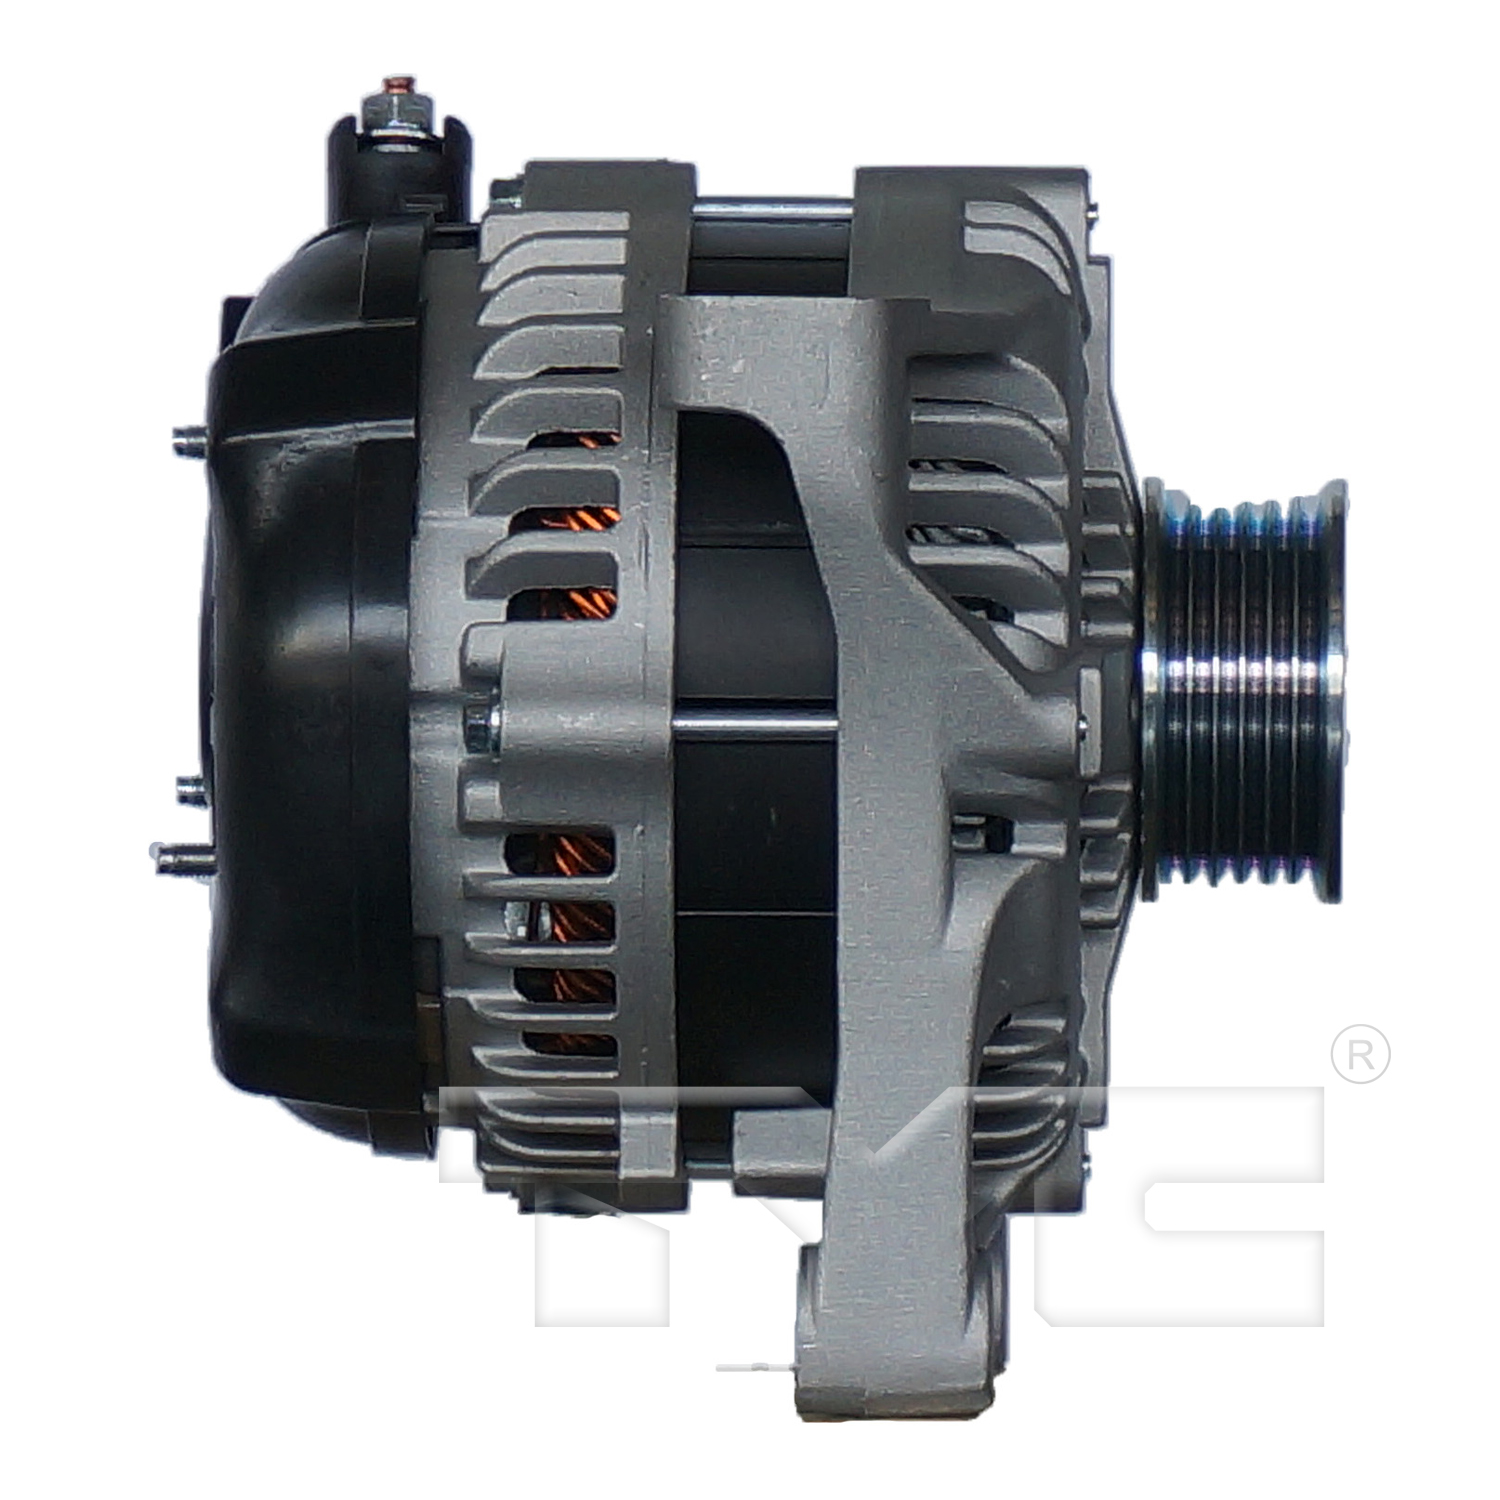 TYC-2-11292_NEW TYC ALTERNATOR 12V 150AMP DENSO SC (HAIRPIN) FOR 2008-2014 FORD LIGHT DUTY TRUCK & SUV WITH 4.6L AND 5.4L ENGINES